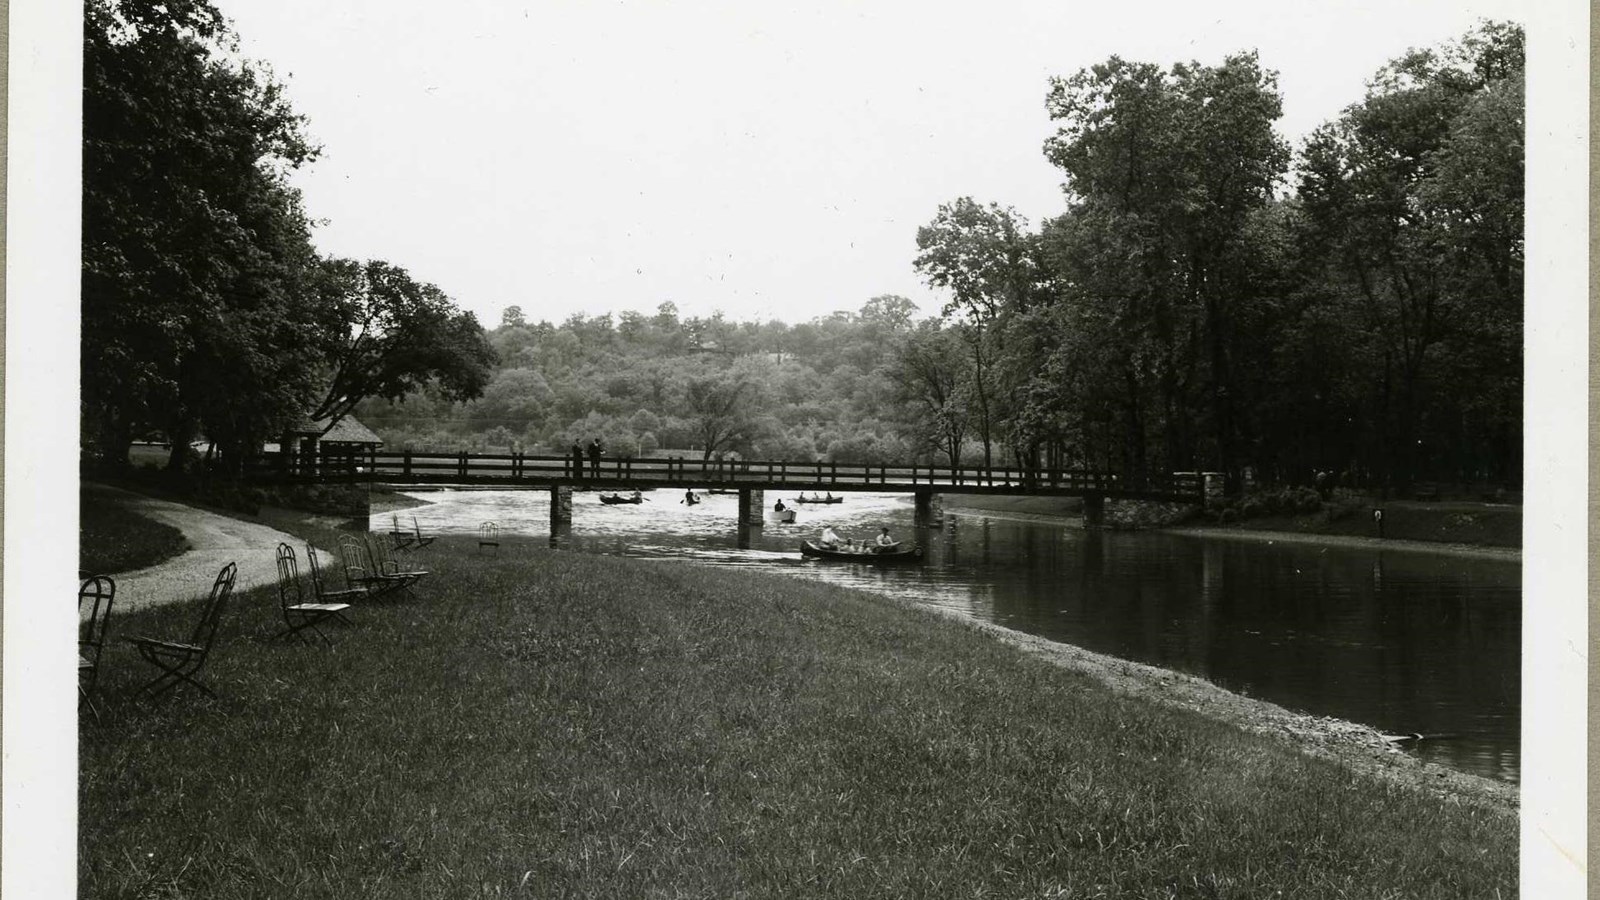 Black and white of flat grassy area next to body of water with bridge over, people boating on water